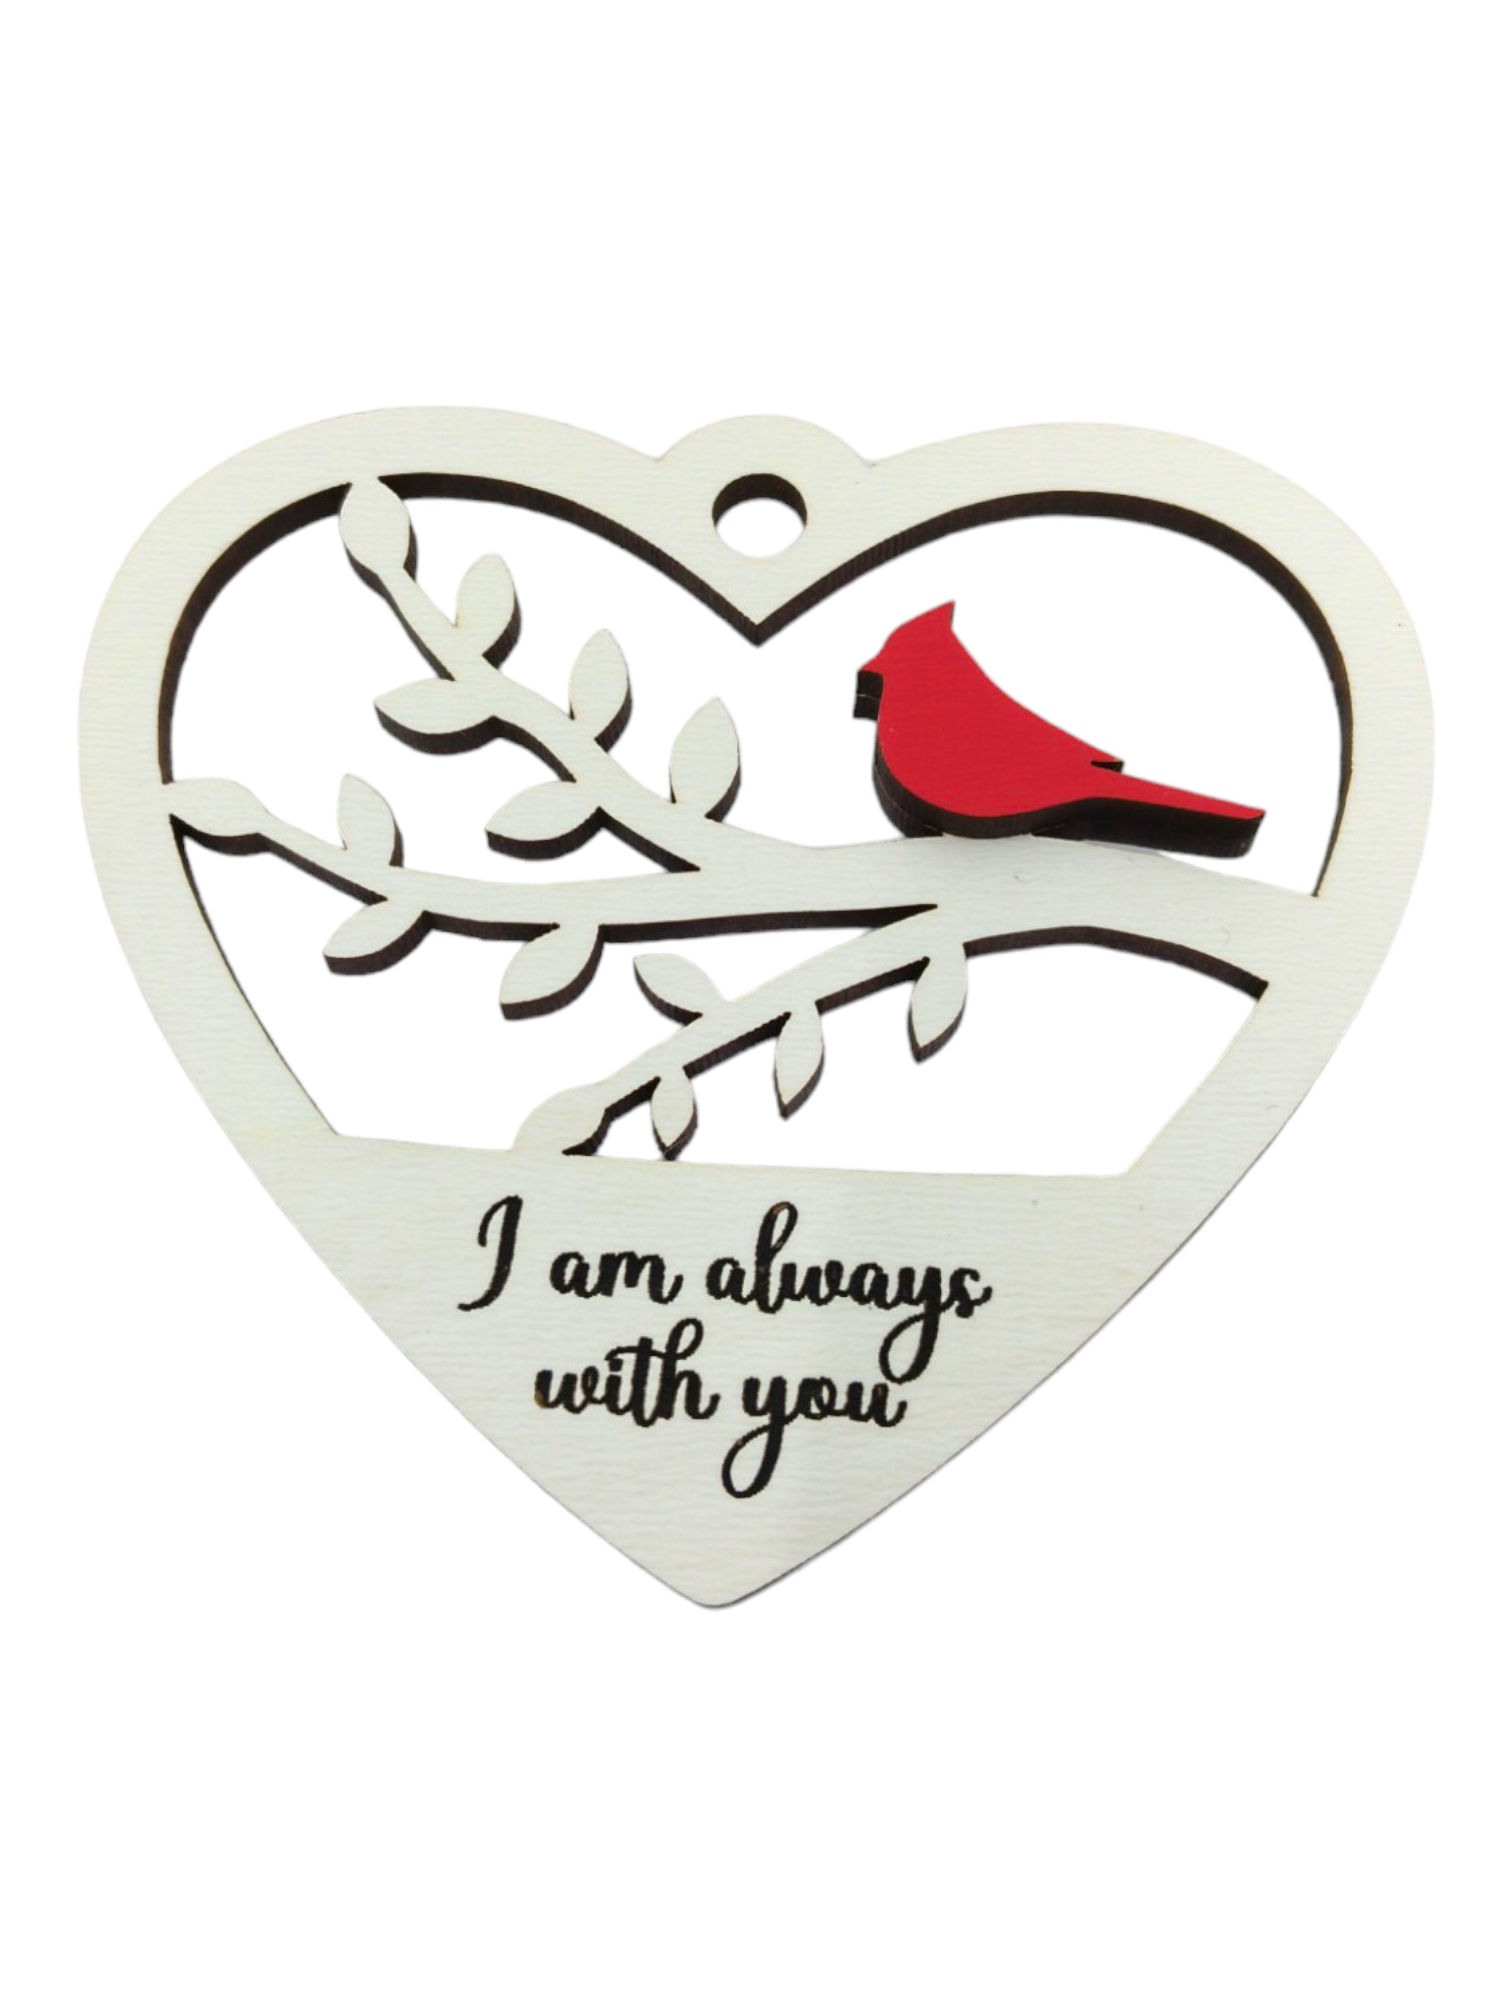 Ornament: 1-Cardinal "I am always with you" Heart Shaped Ornament